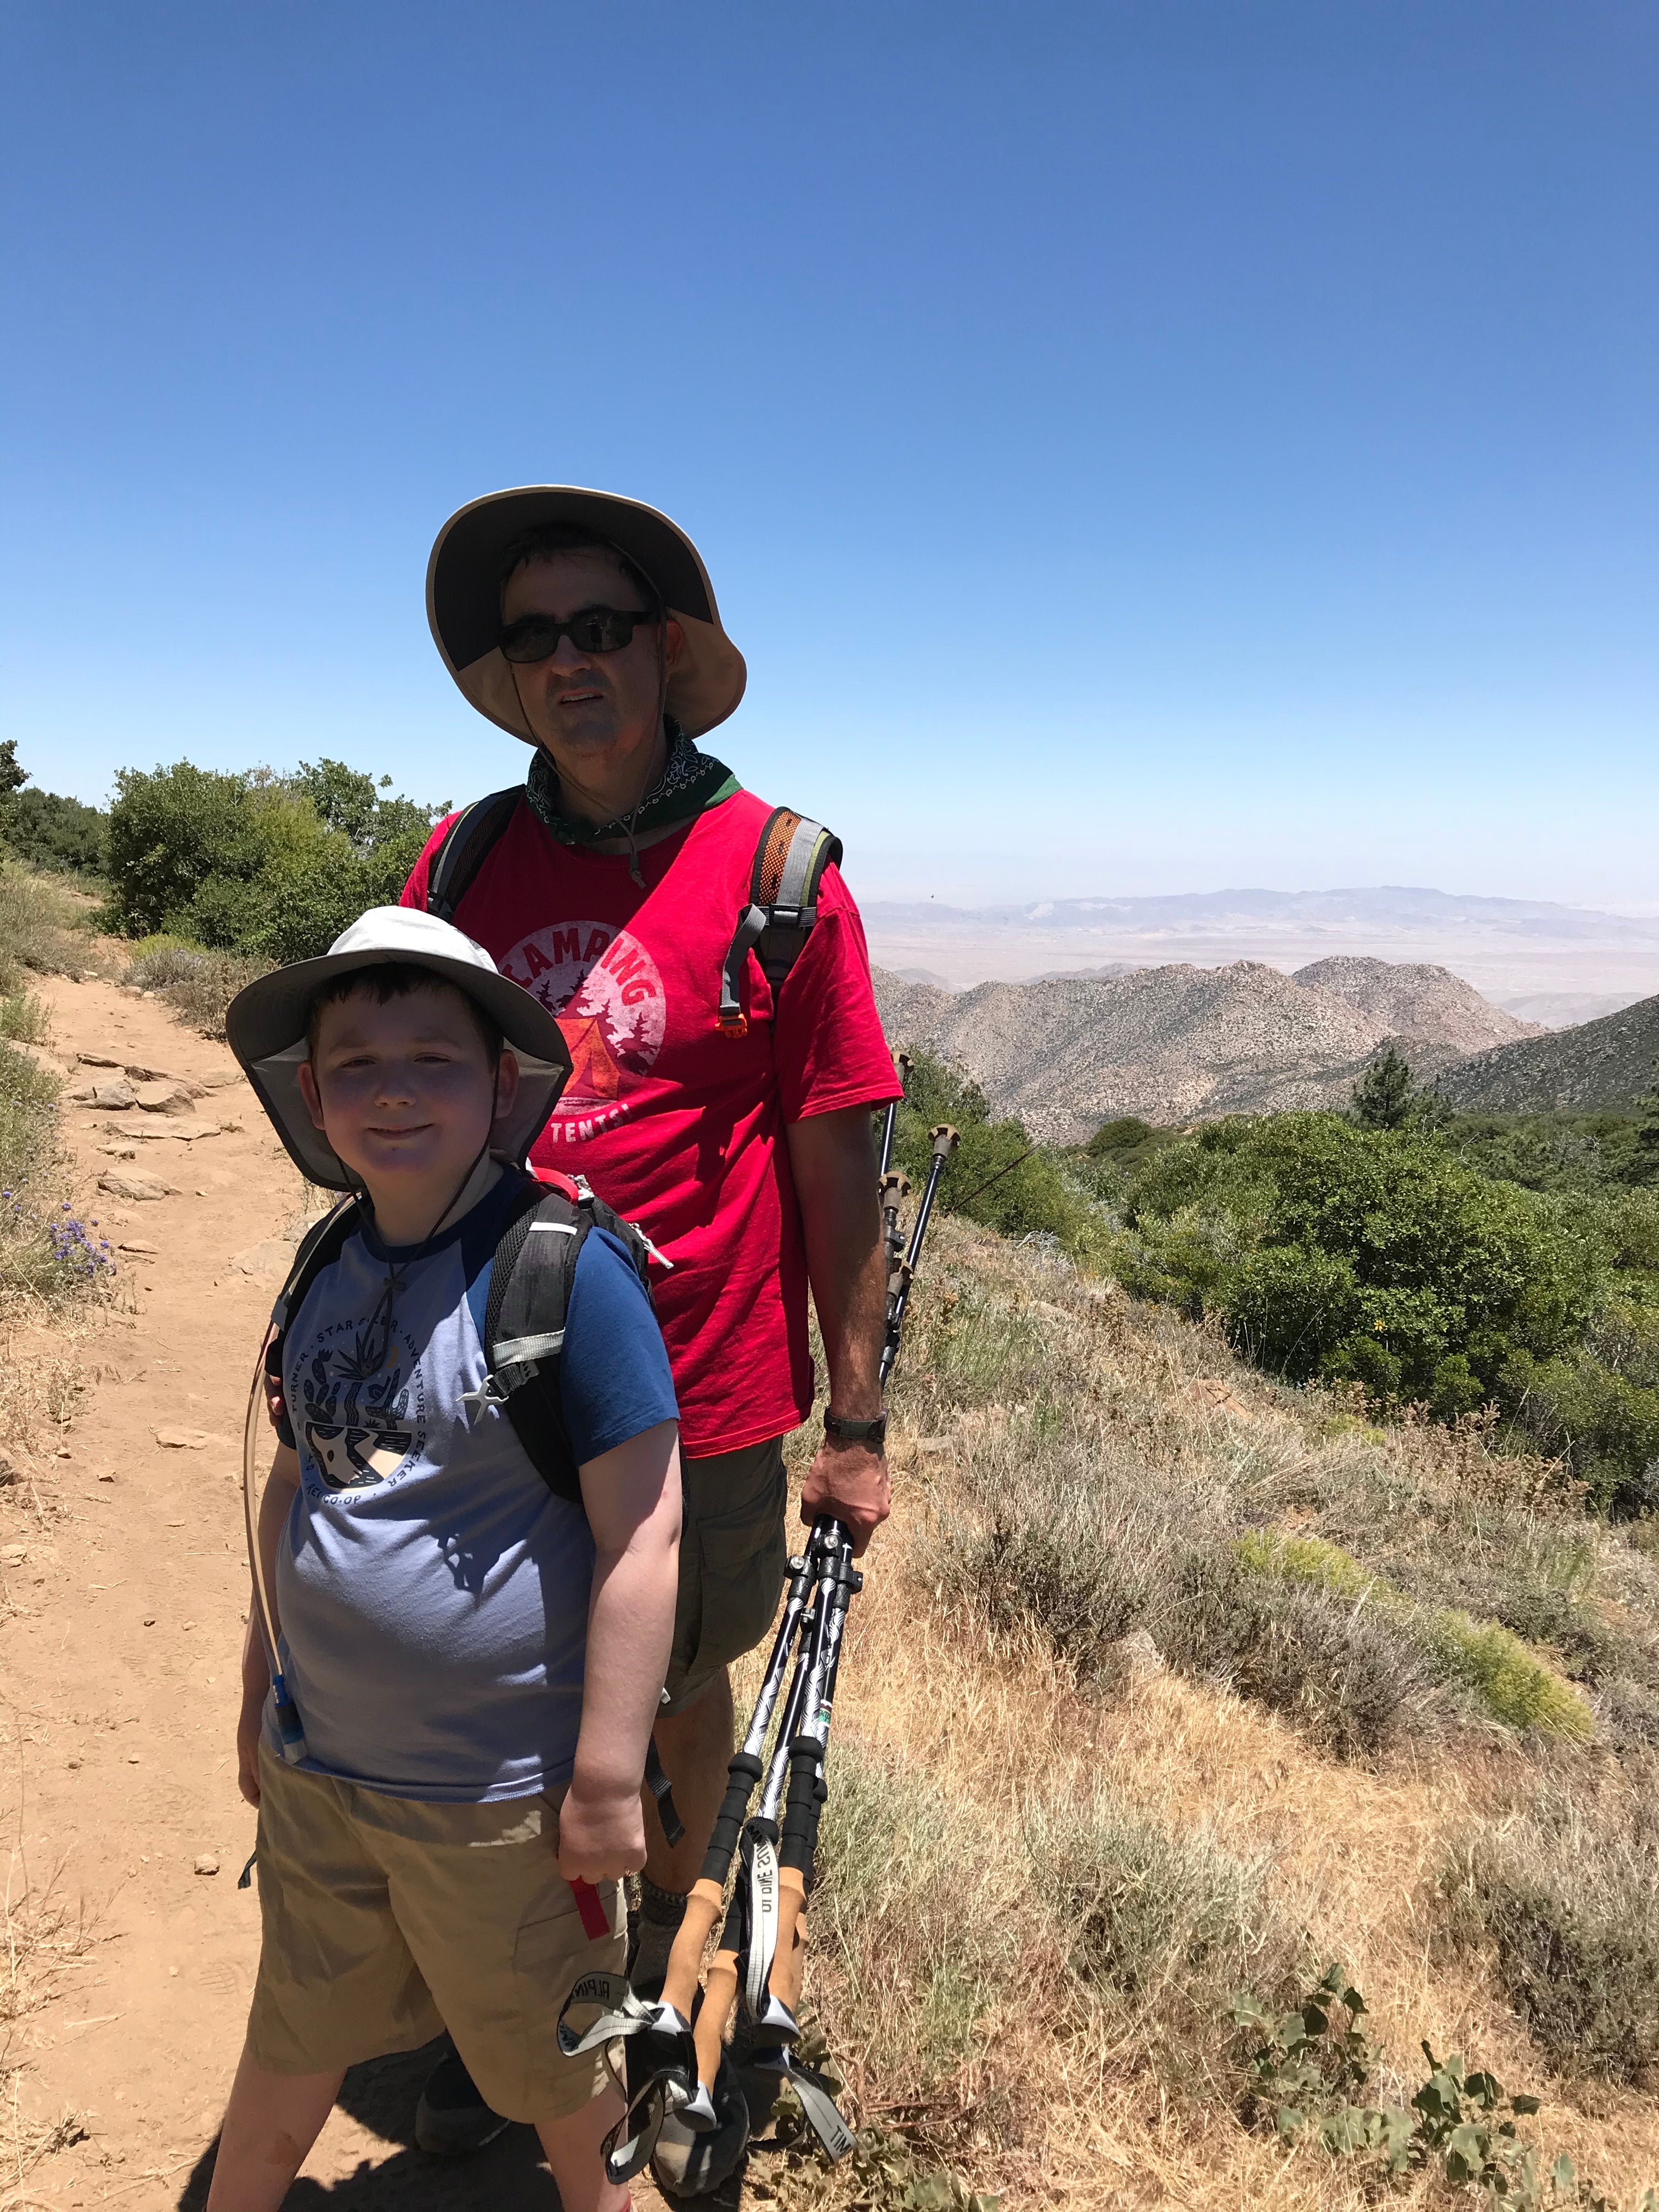 A kid can definitely hike the Desert View trail